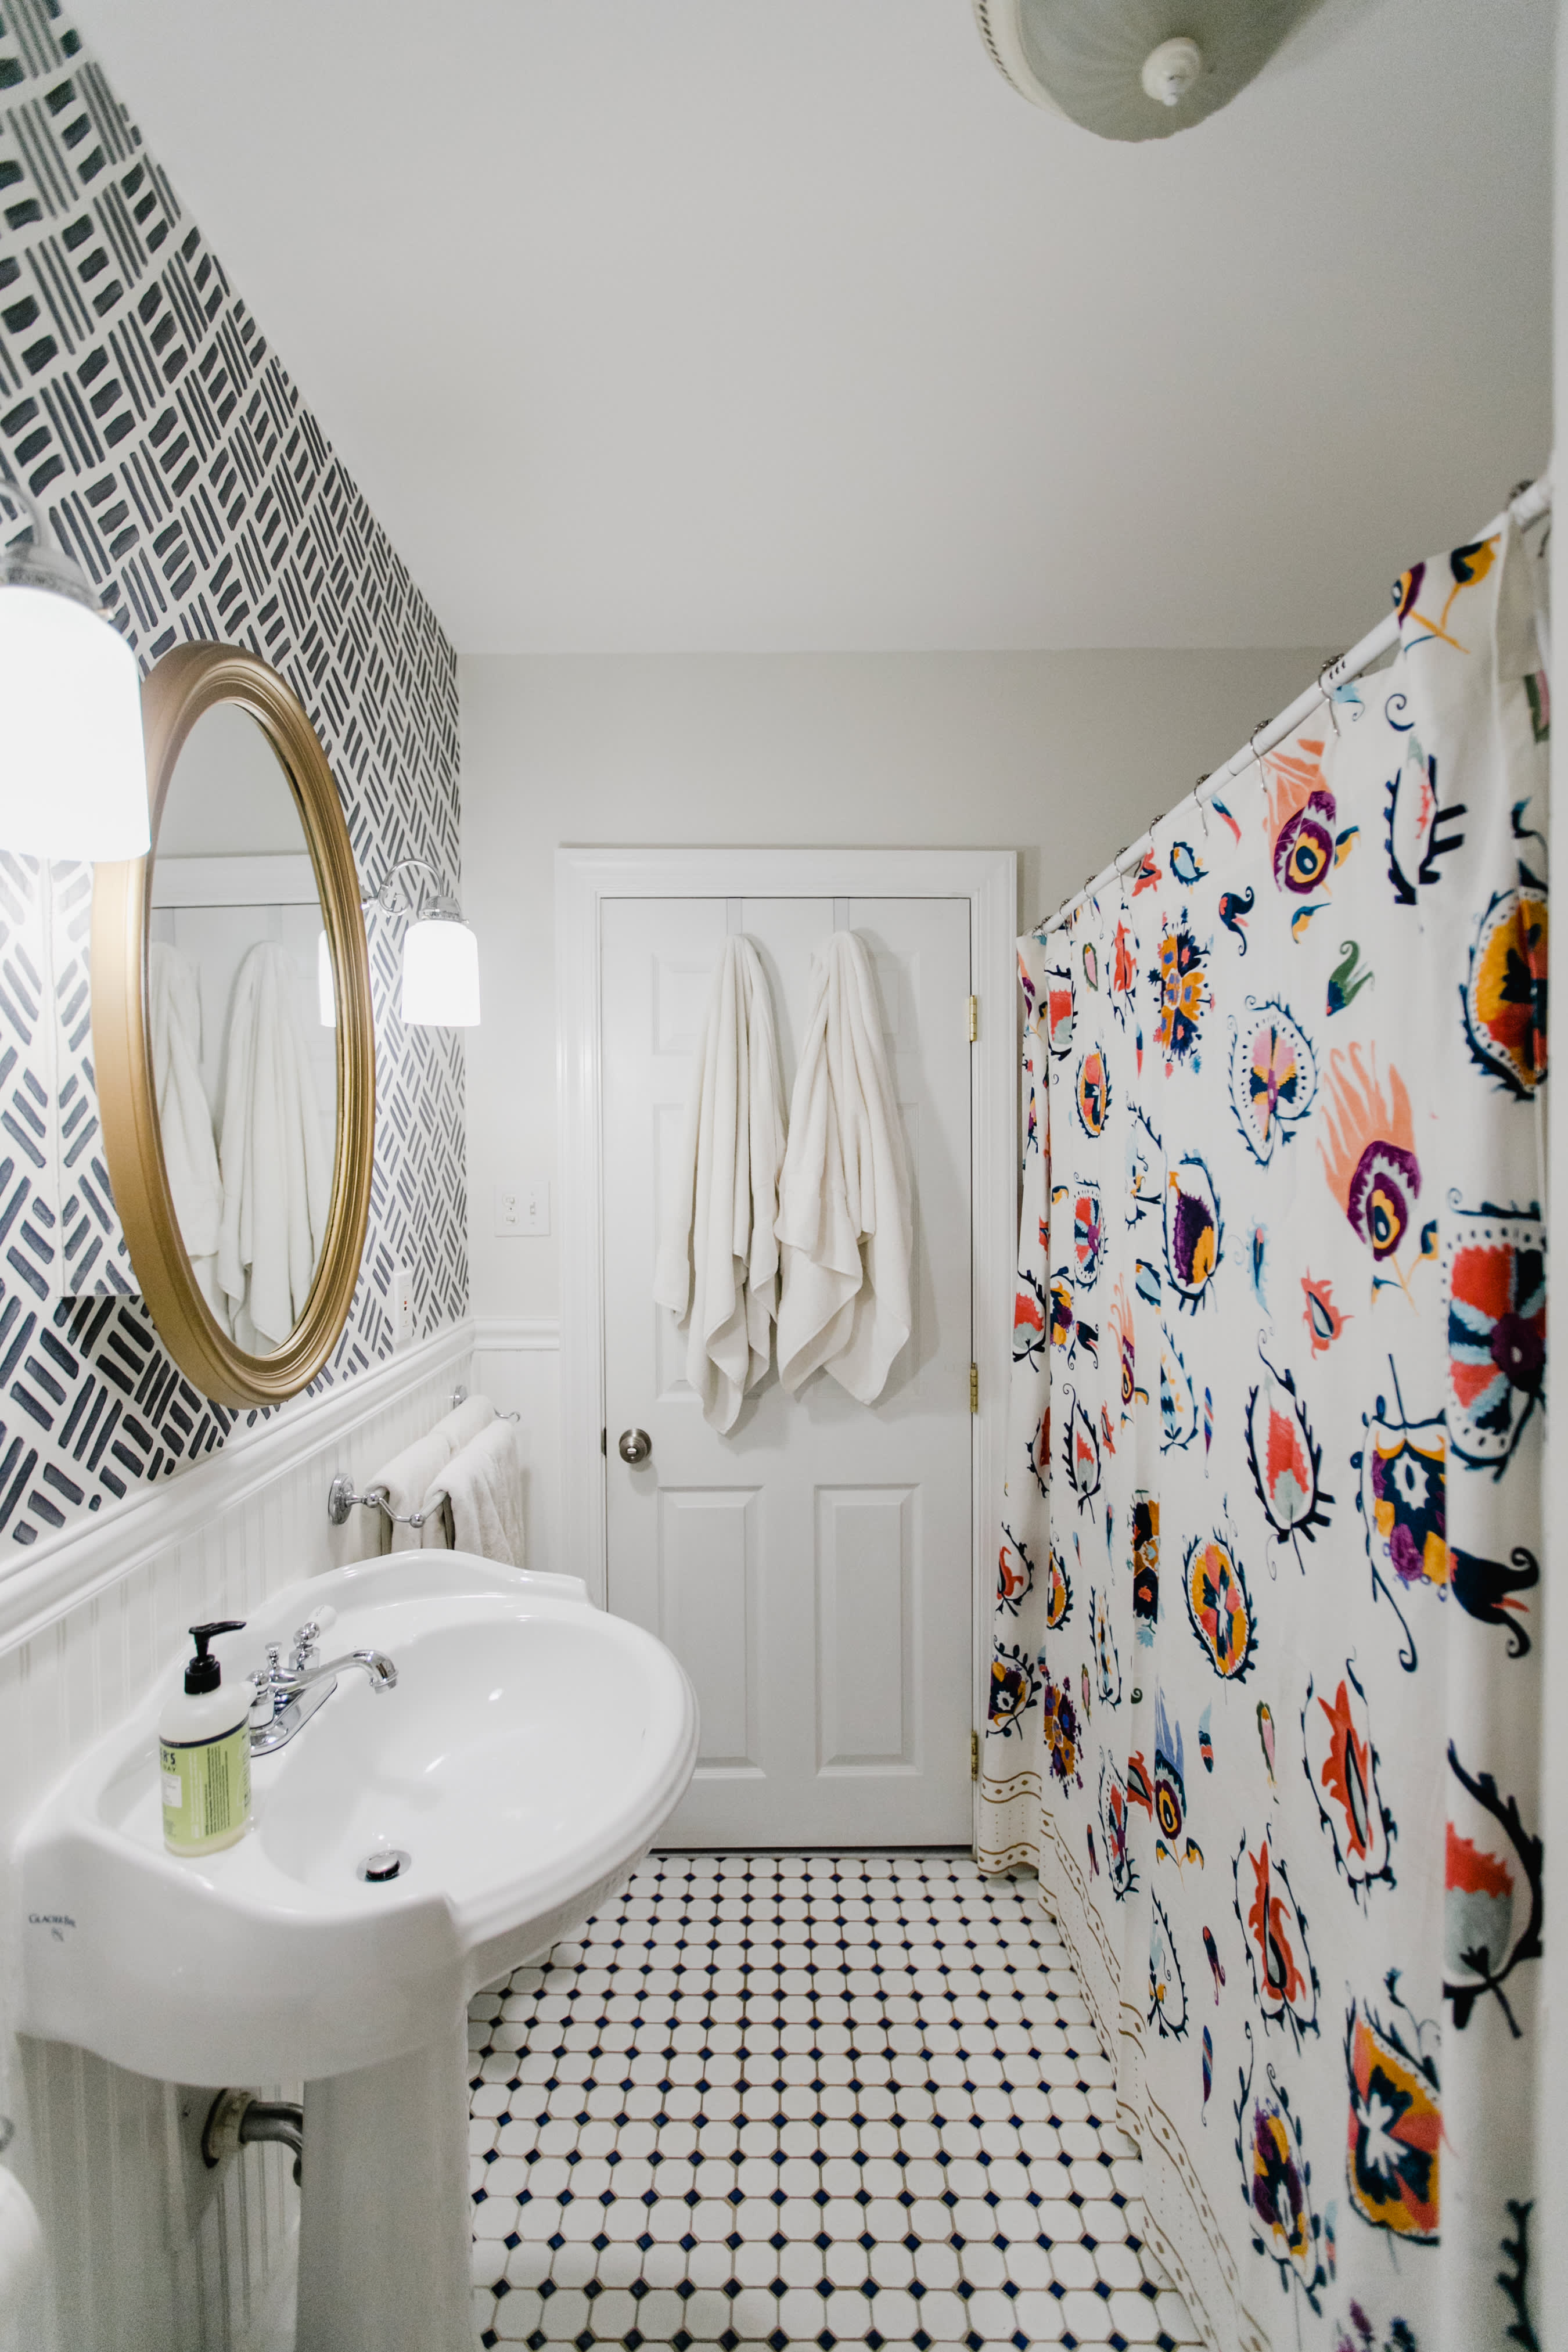 Add extra storage with an extra shower curtain rod, then all you have to so  is…